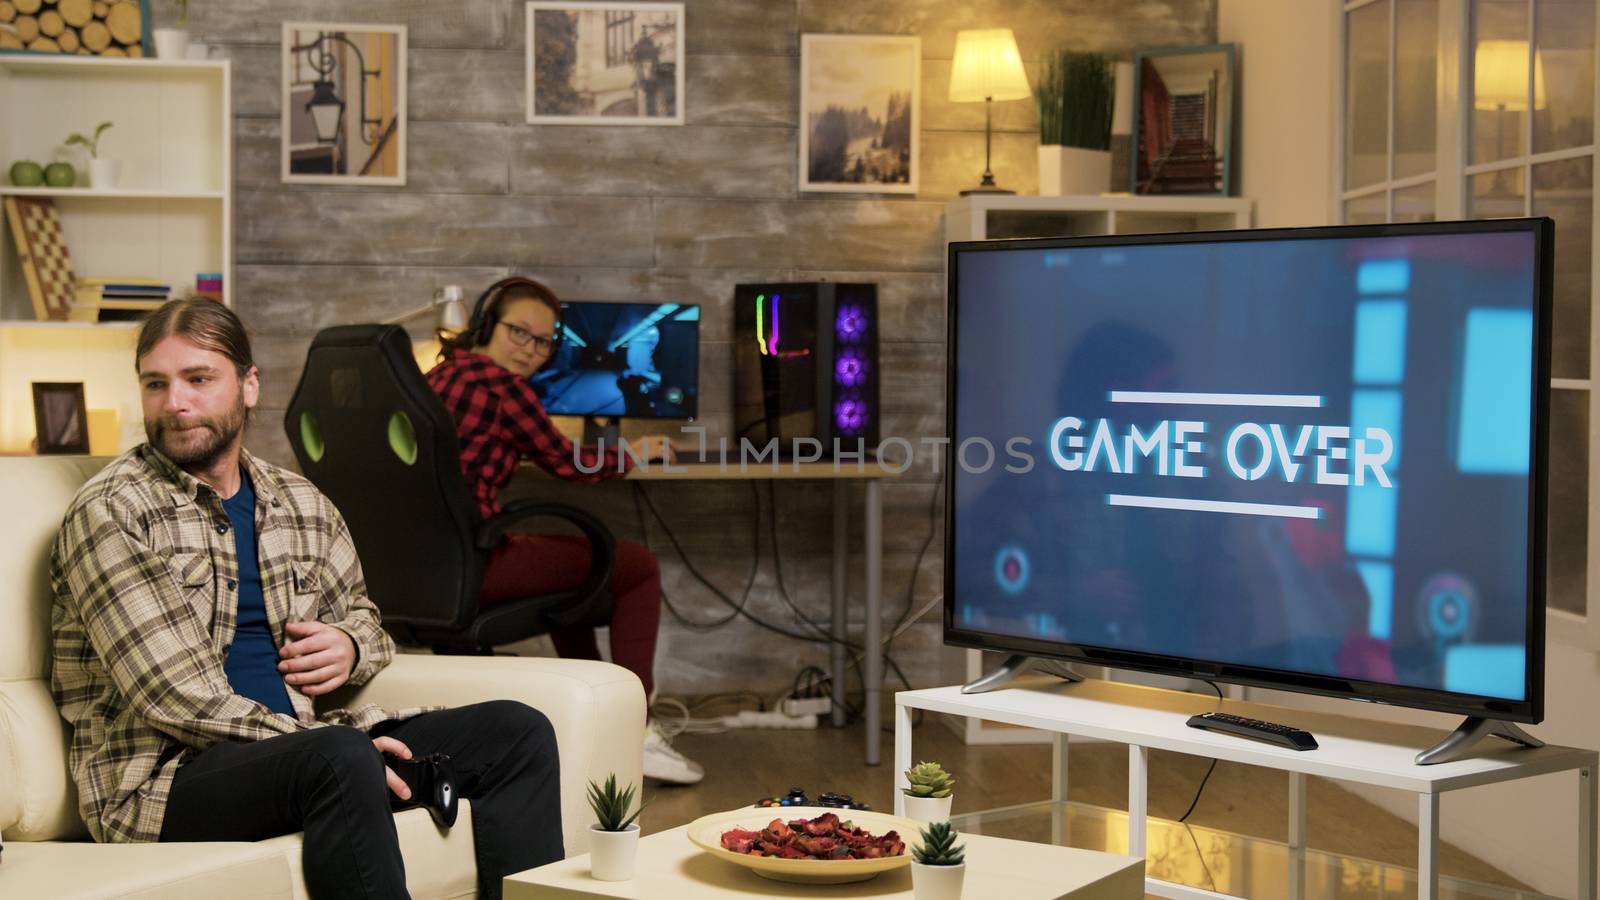 Game over for a young playing video games with vr headset sitting on sofa. Girlfriend looking at boyfriend after losing at video games.